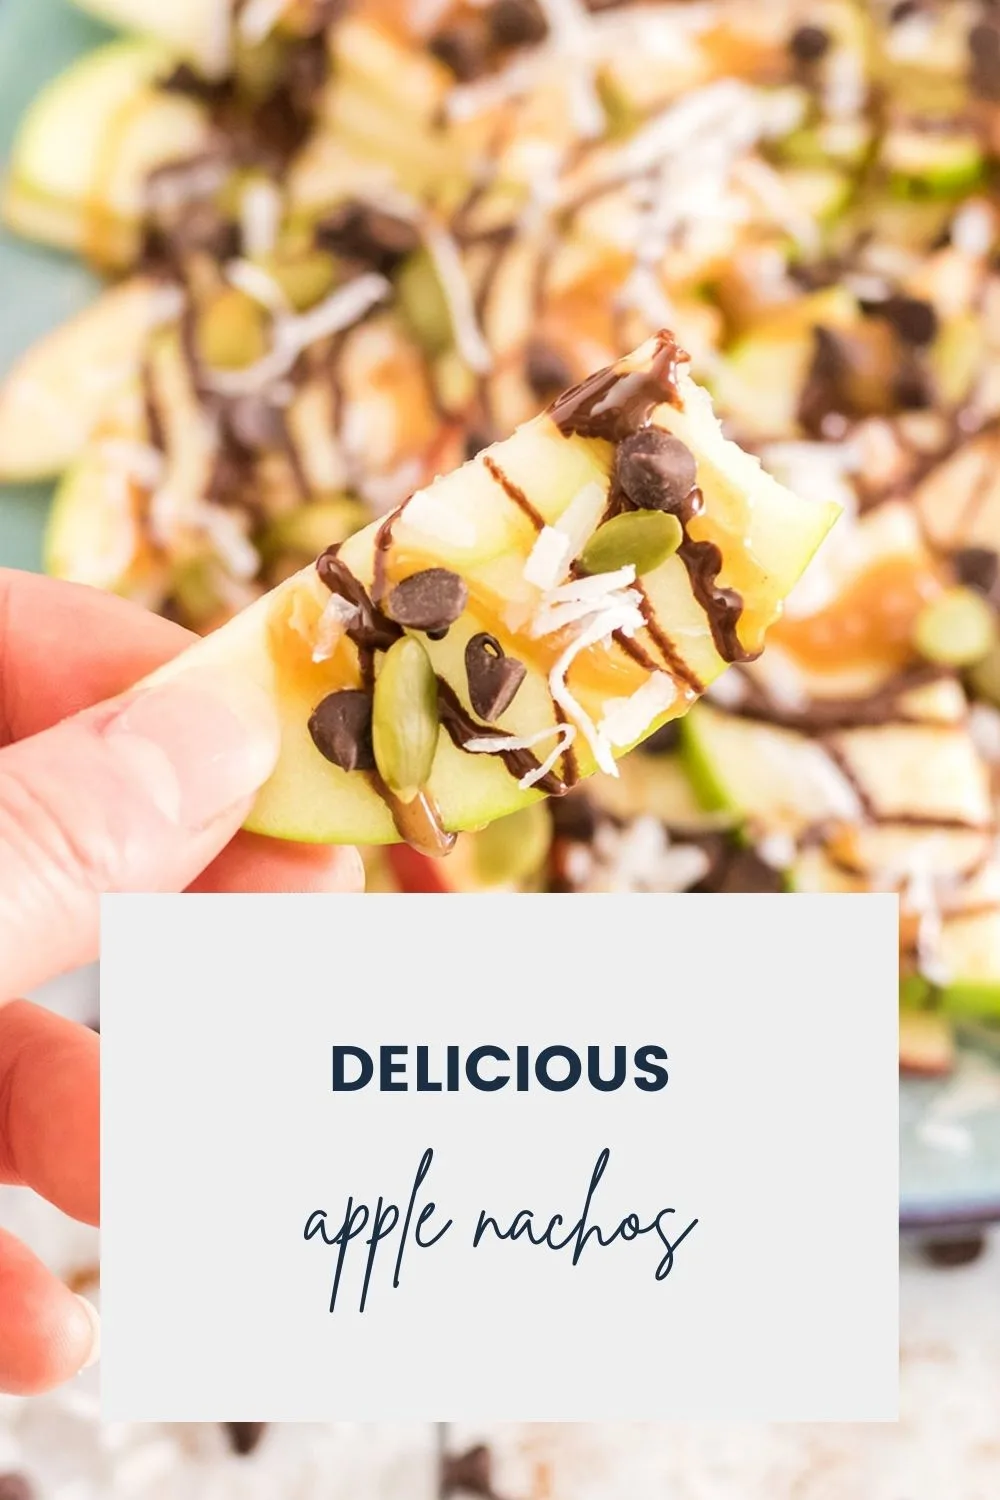 Slices of apples with drizzles of caramel and chocolate sauce and other toppings.